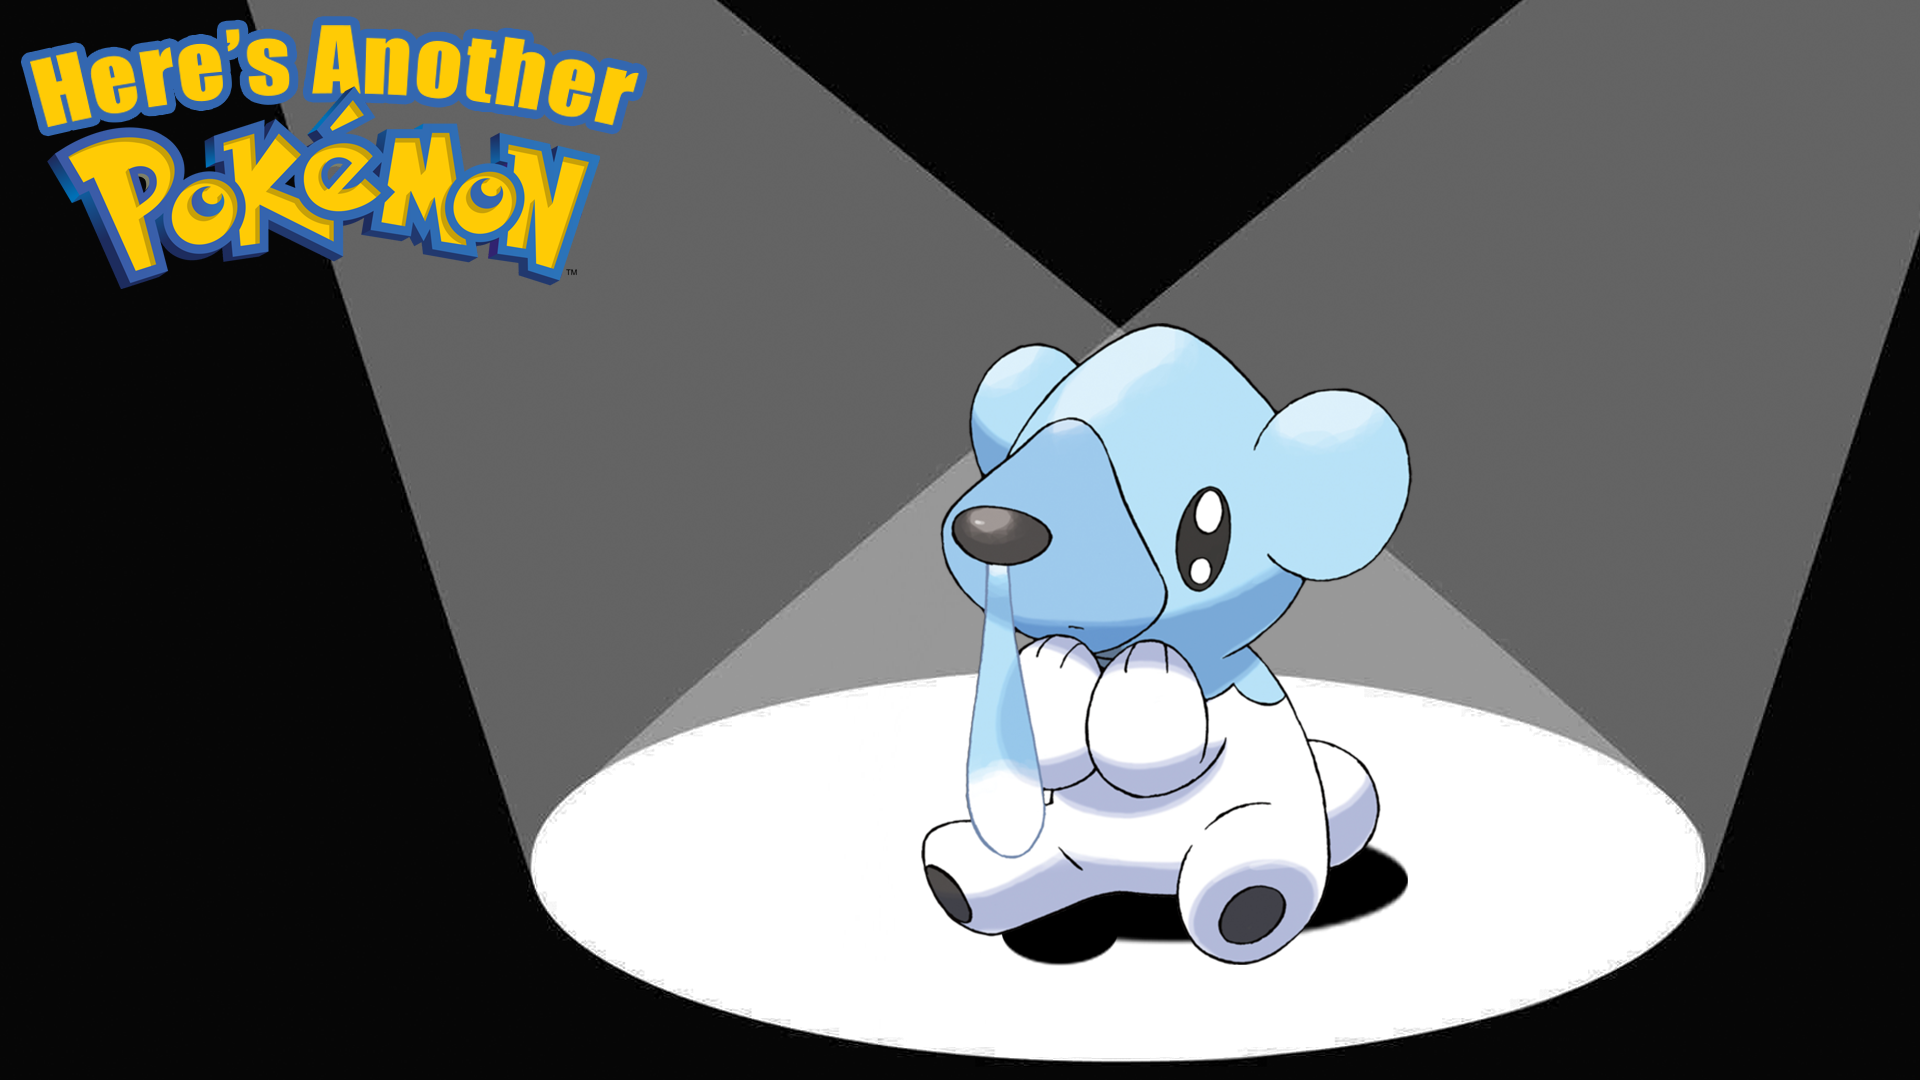 Cubchoo Has Cold Snot Dripping Out Its Nose That Powers Its Attacks